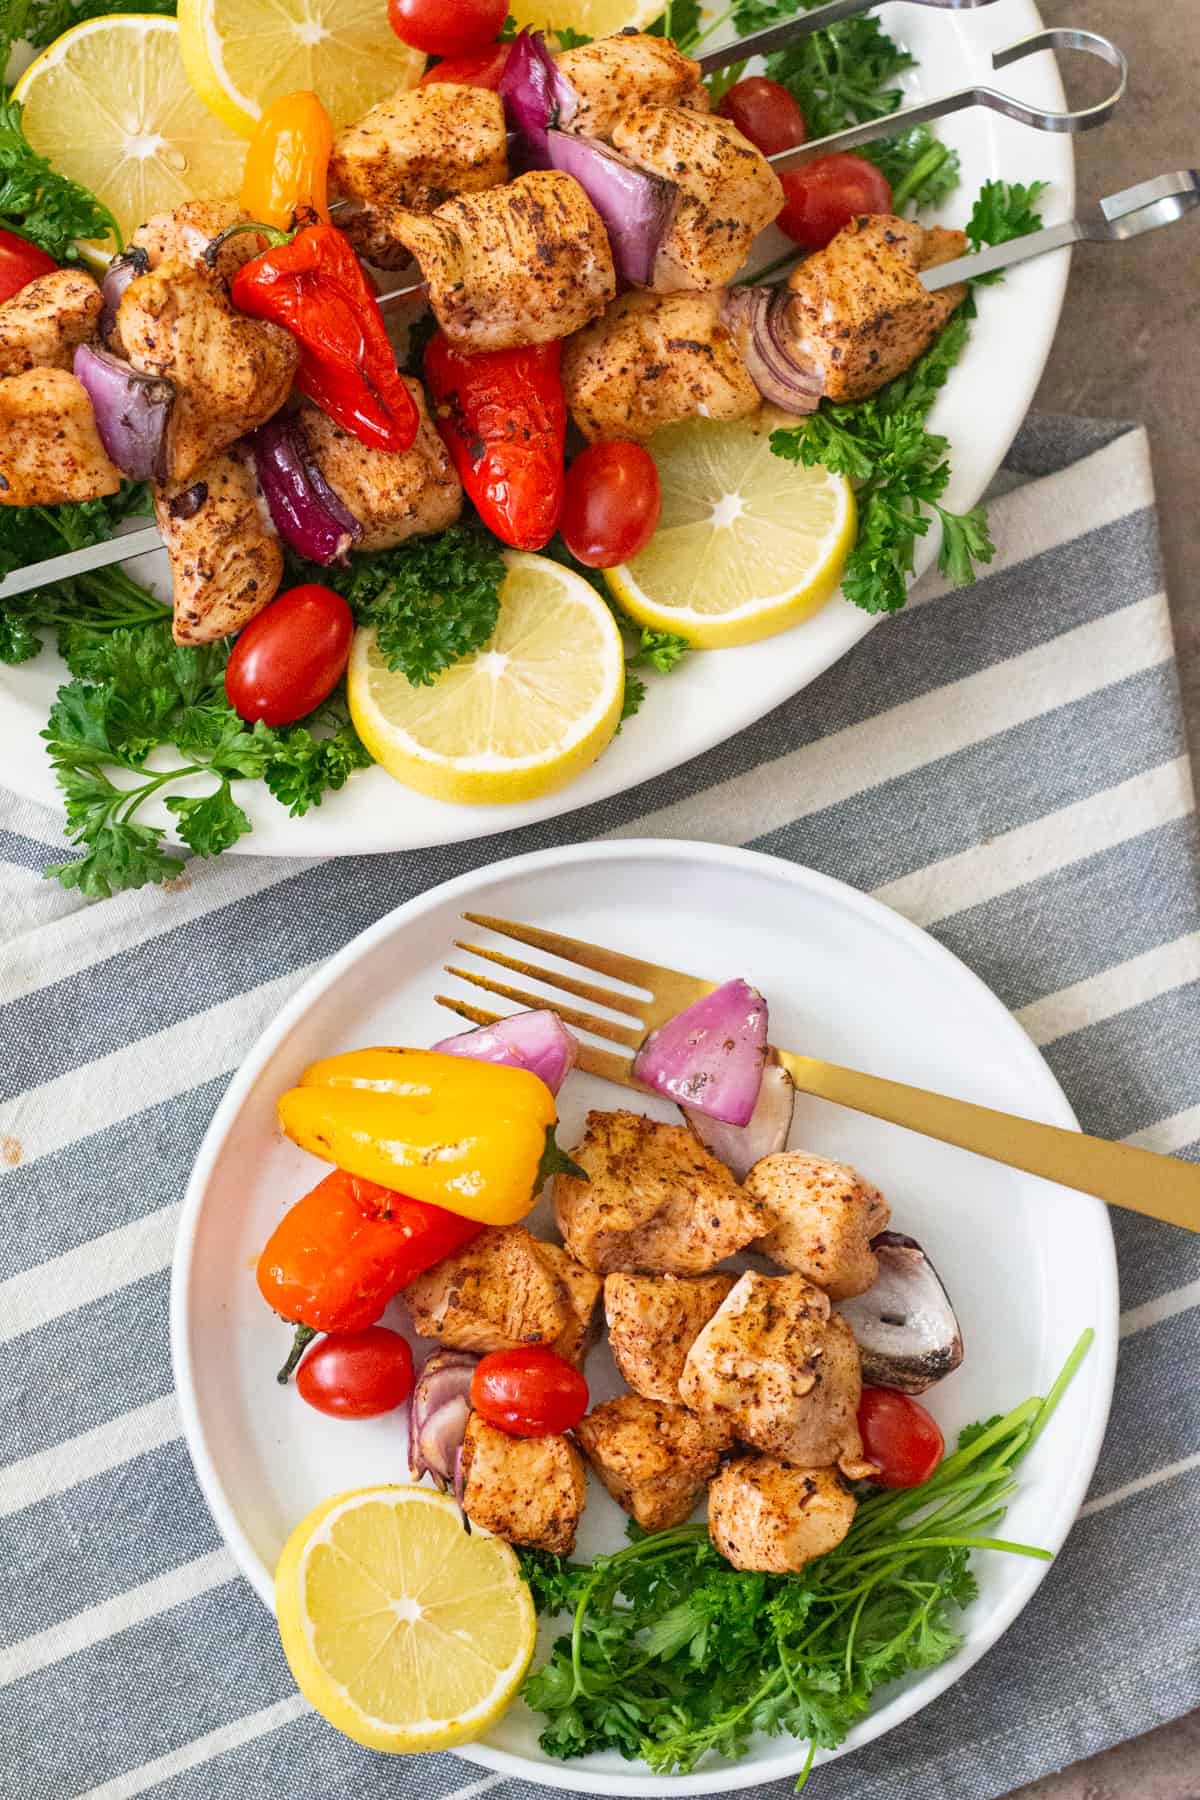 Easy chicken shish kabob recipe made on the grill or in the oven. This Mediterranean chicken kabobs are flavored with delicious spices and are quick to make. 